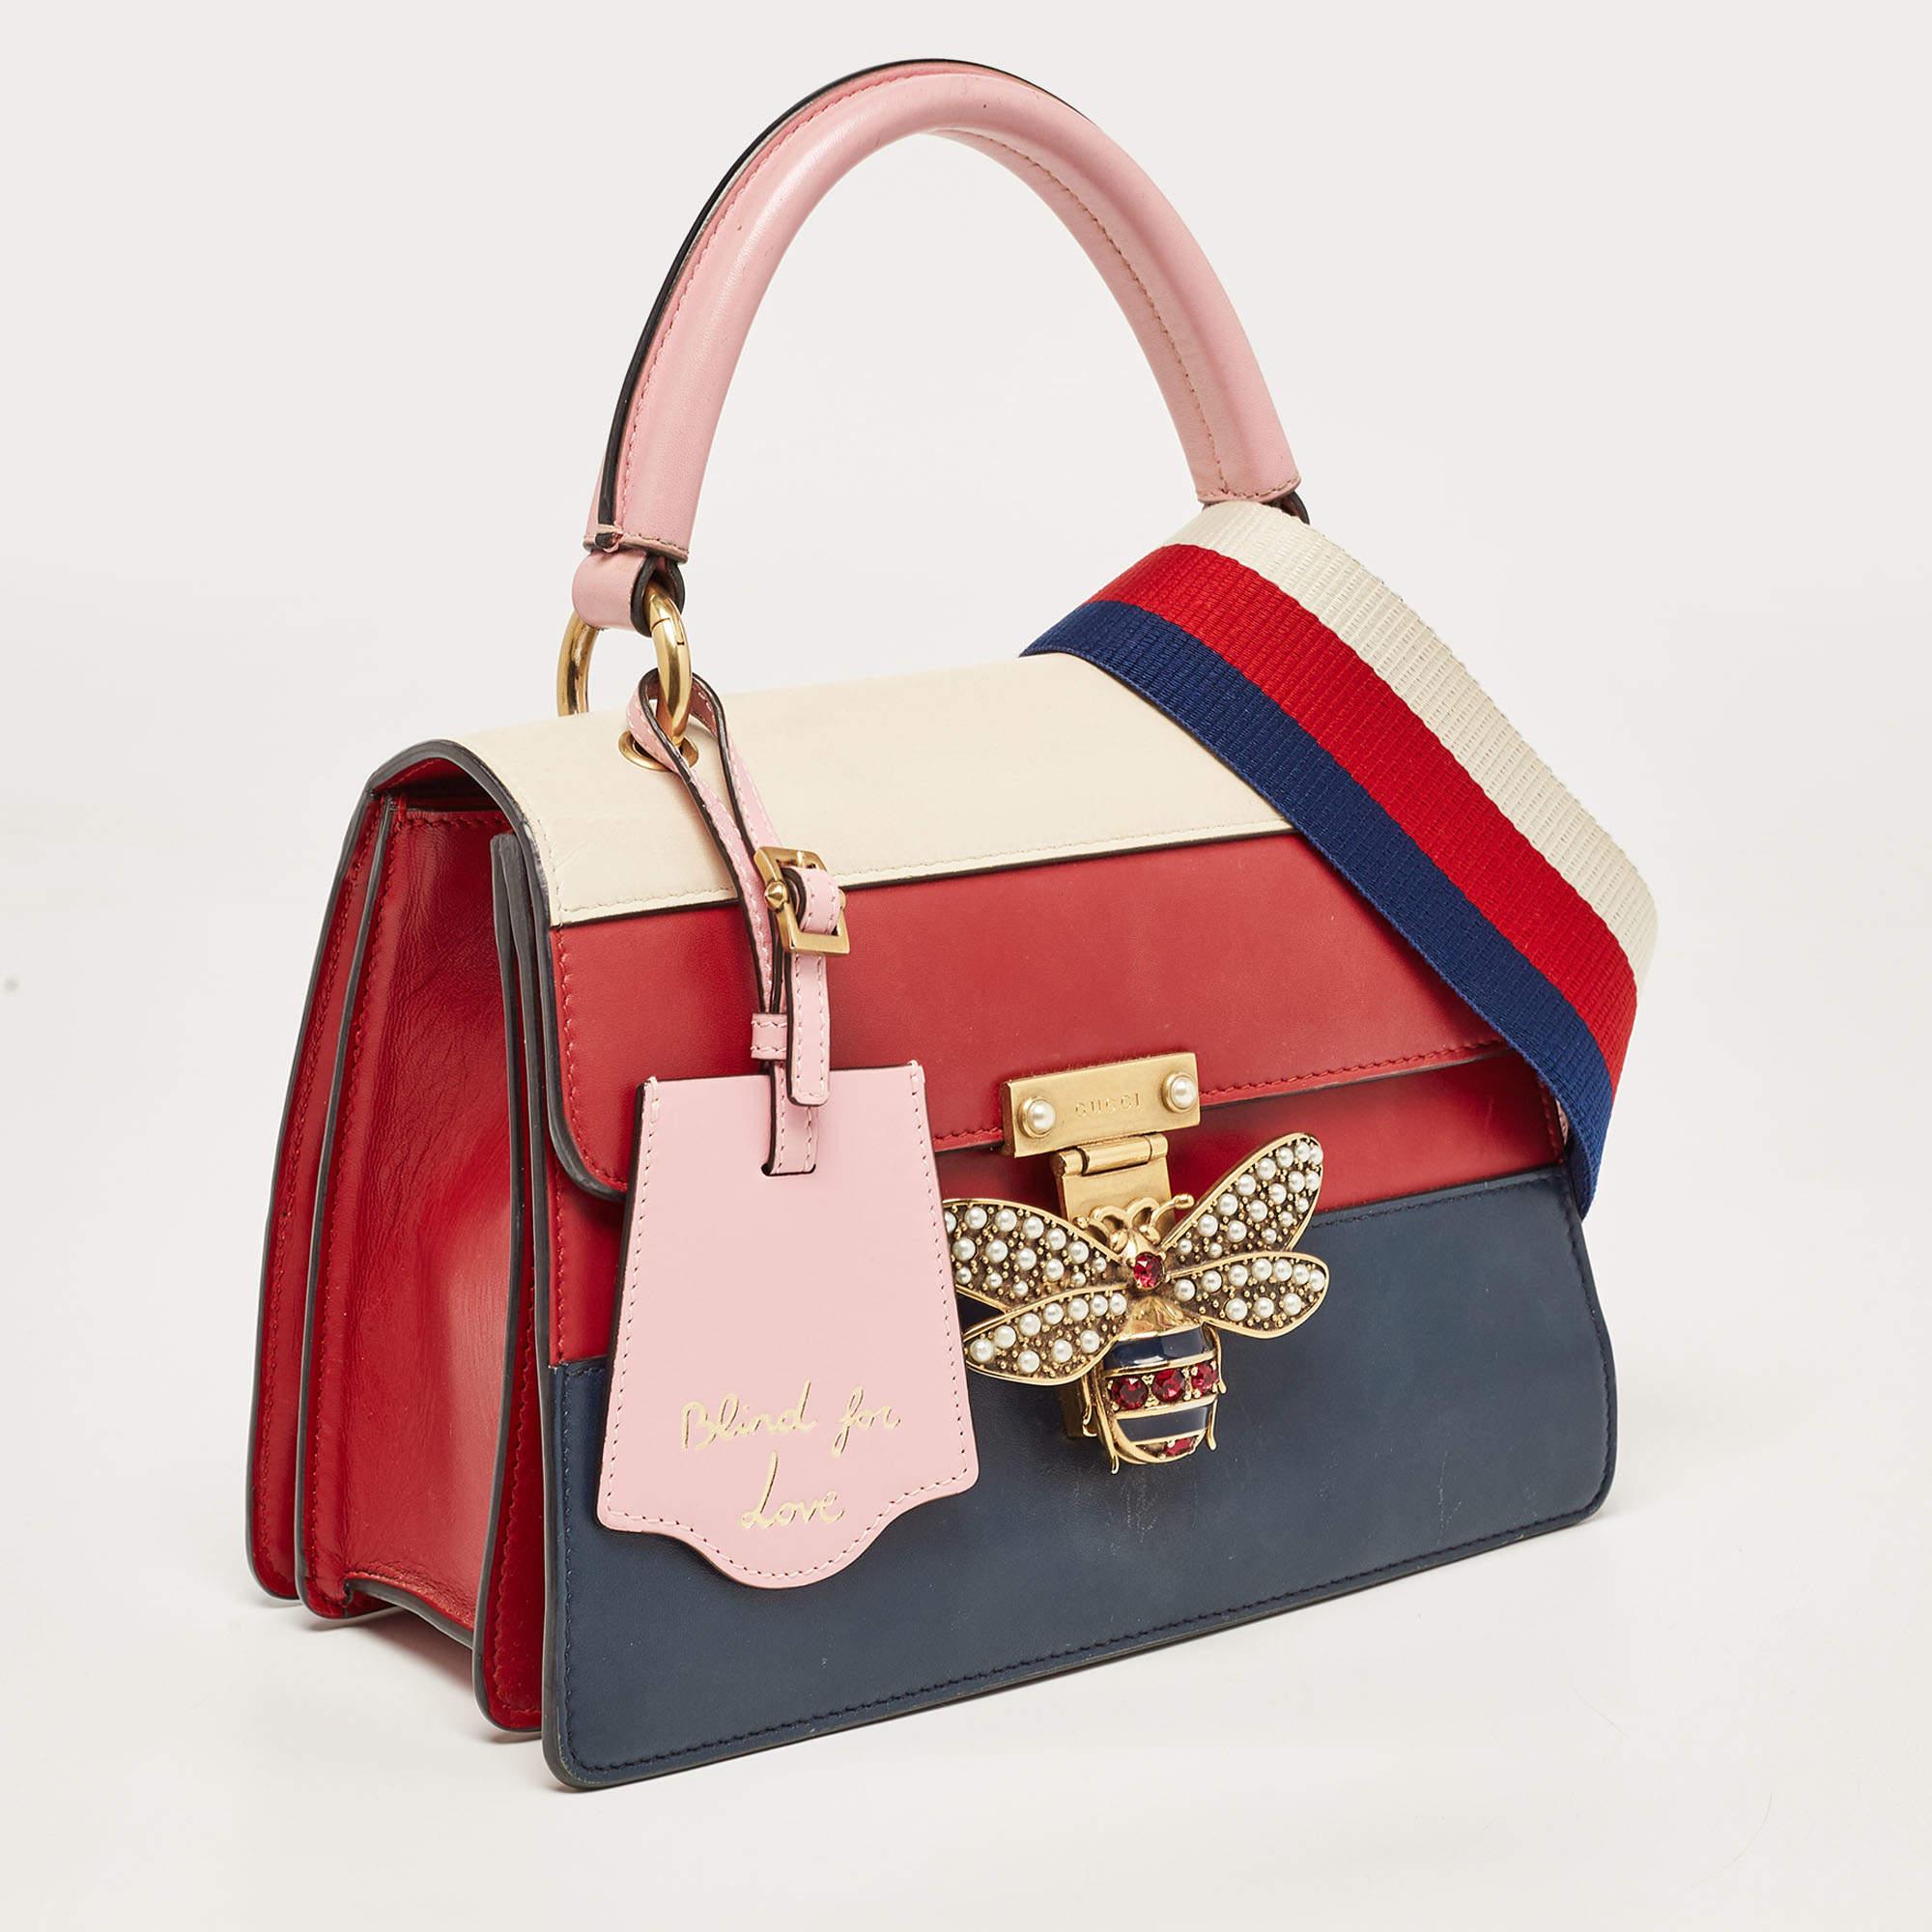 Gucci Multicolor Leather Small Queen Margaret Top Handle Bag For Sale 4